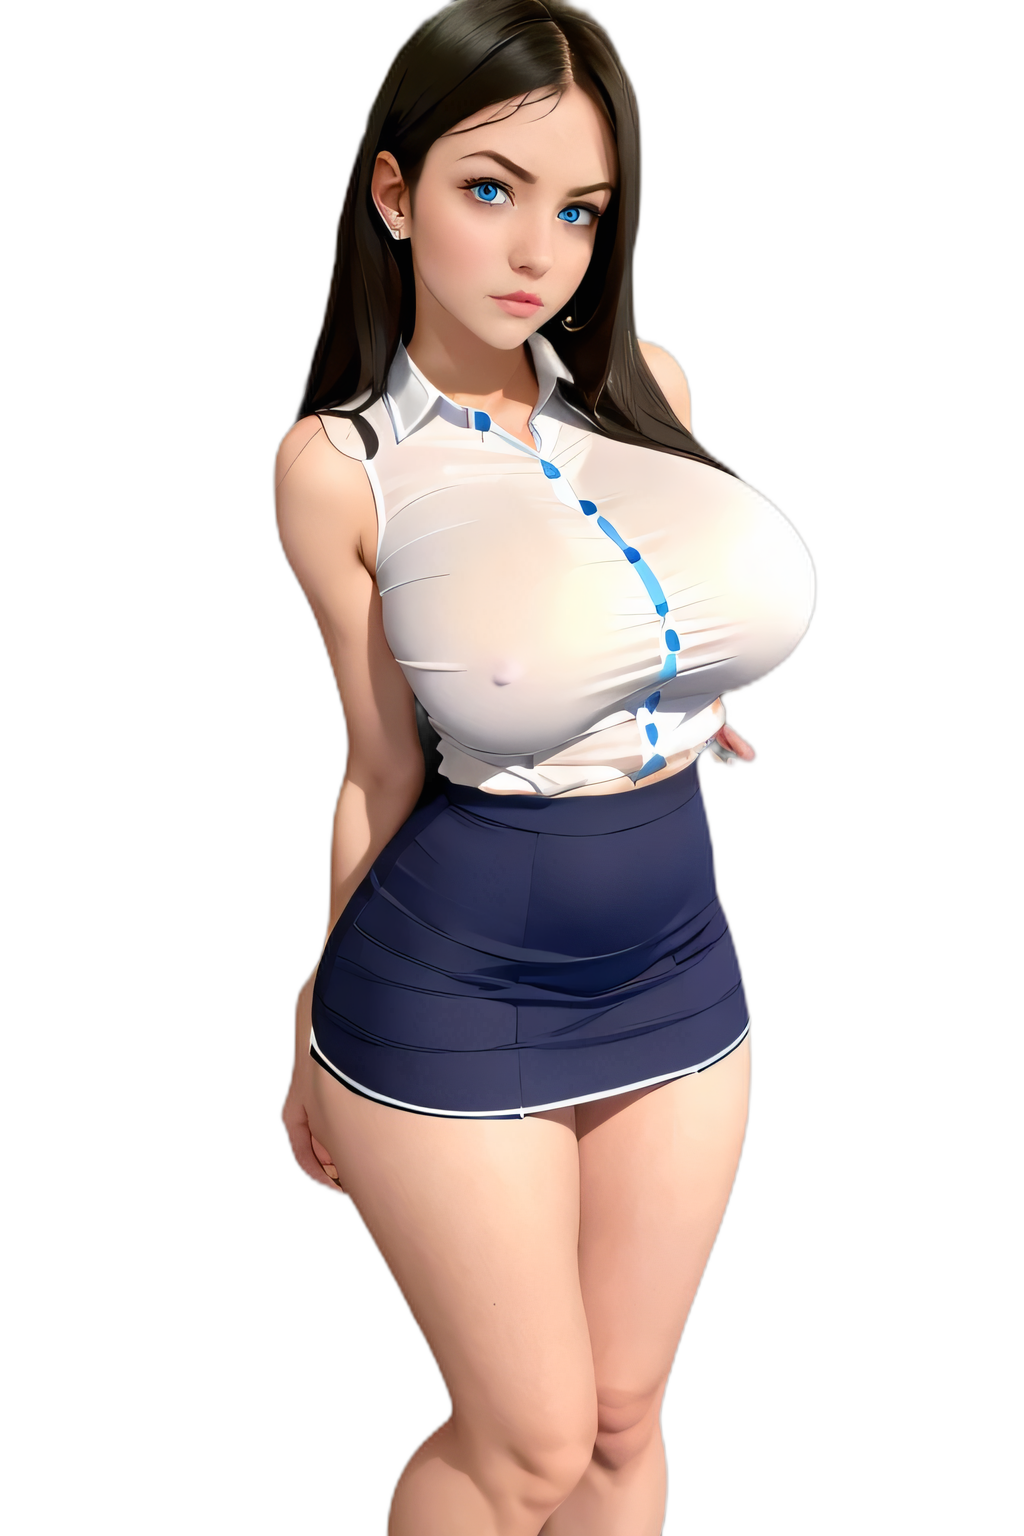 Female,Submissive,Anime,Huge Breasts,NTR,Cute,Realistic,Hot Broken petite teen. She does occasional drugs and enjoys drinking. She has recently lost her job... She is feeling lonely and slightly aroused.